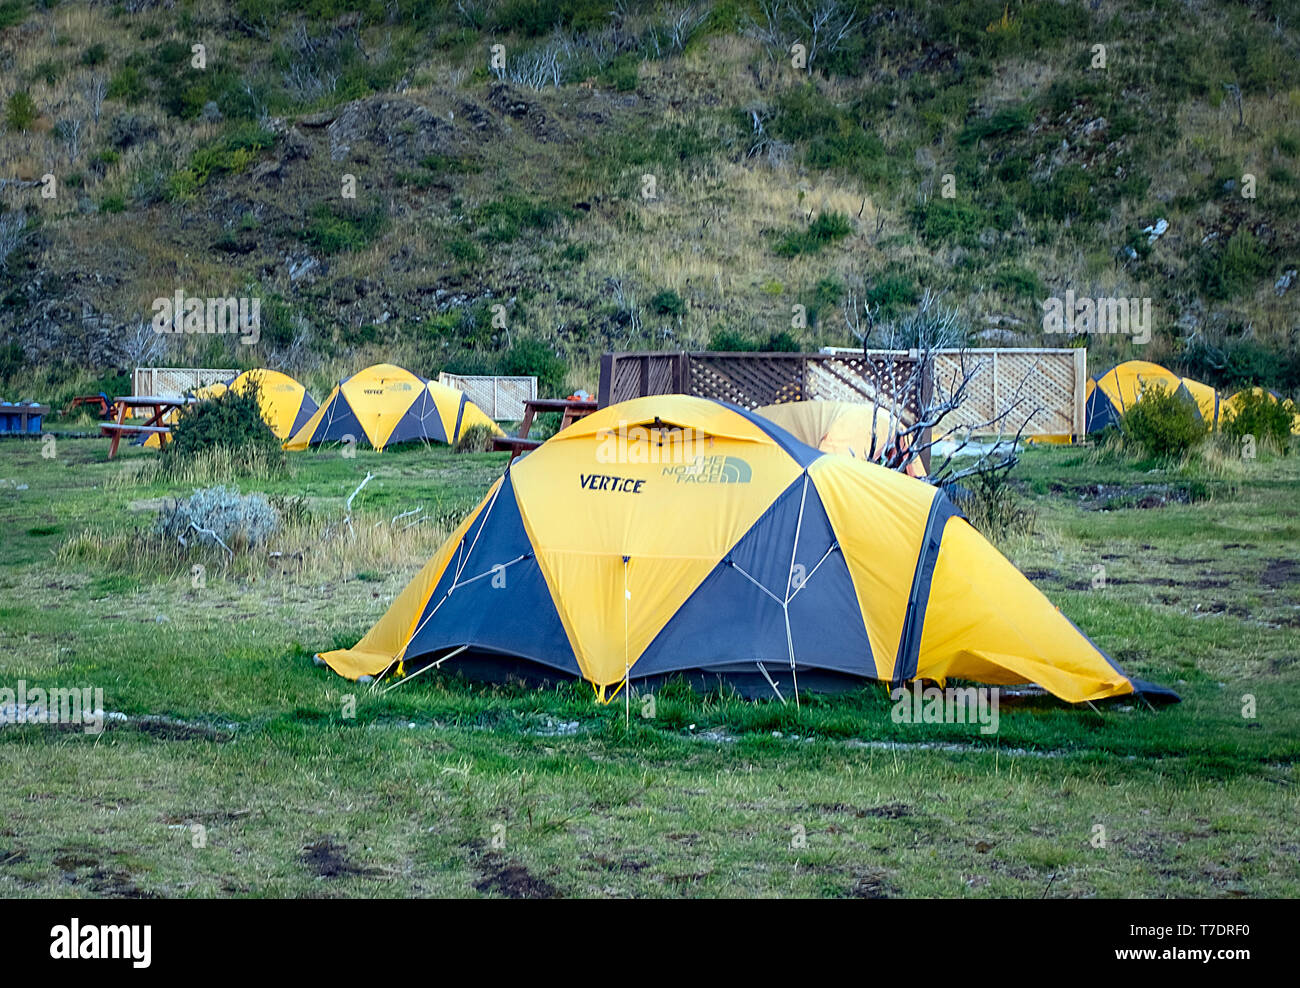 April 2019: Lodging, camp sites, and meals are available to hikers at Refugio Paine Grande along the 71km W Circuit and 115km Paine Circuit, Torres del Paine National Park, Patagonia, Chile. Stock Photo